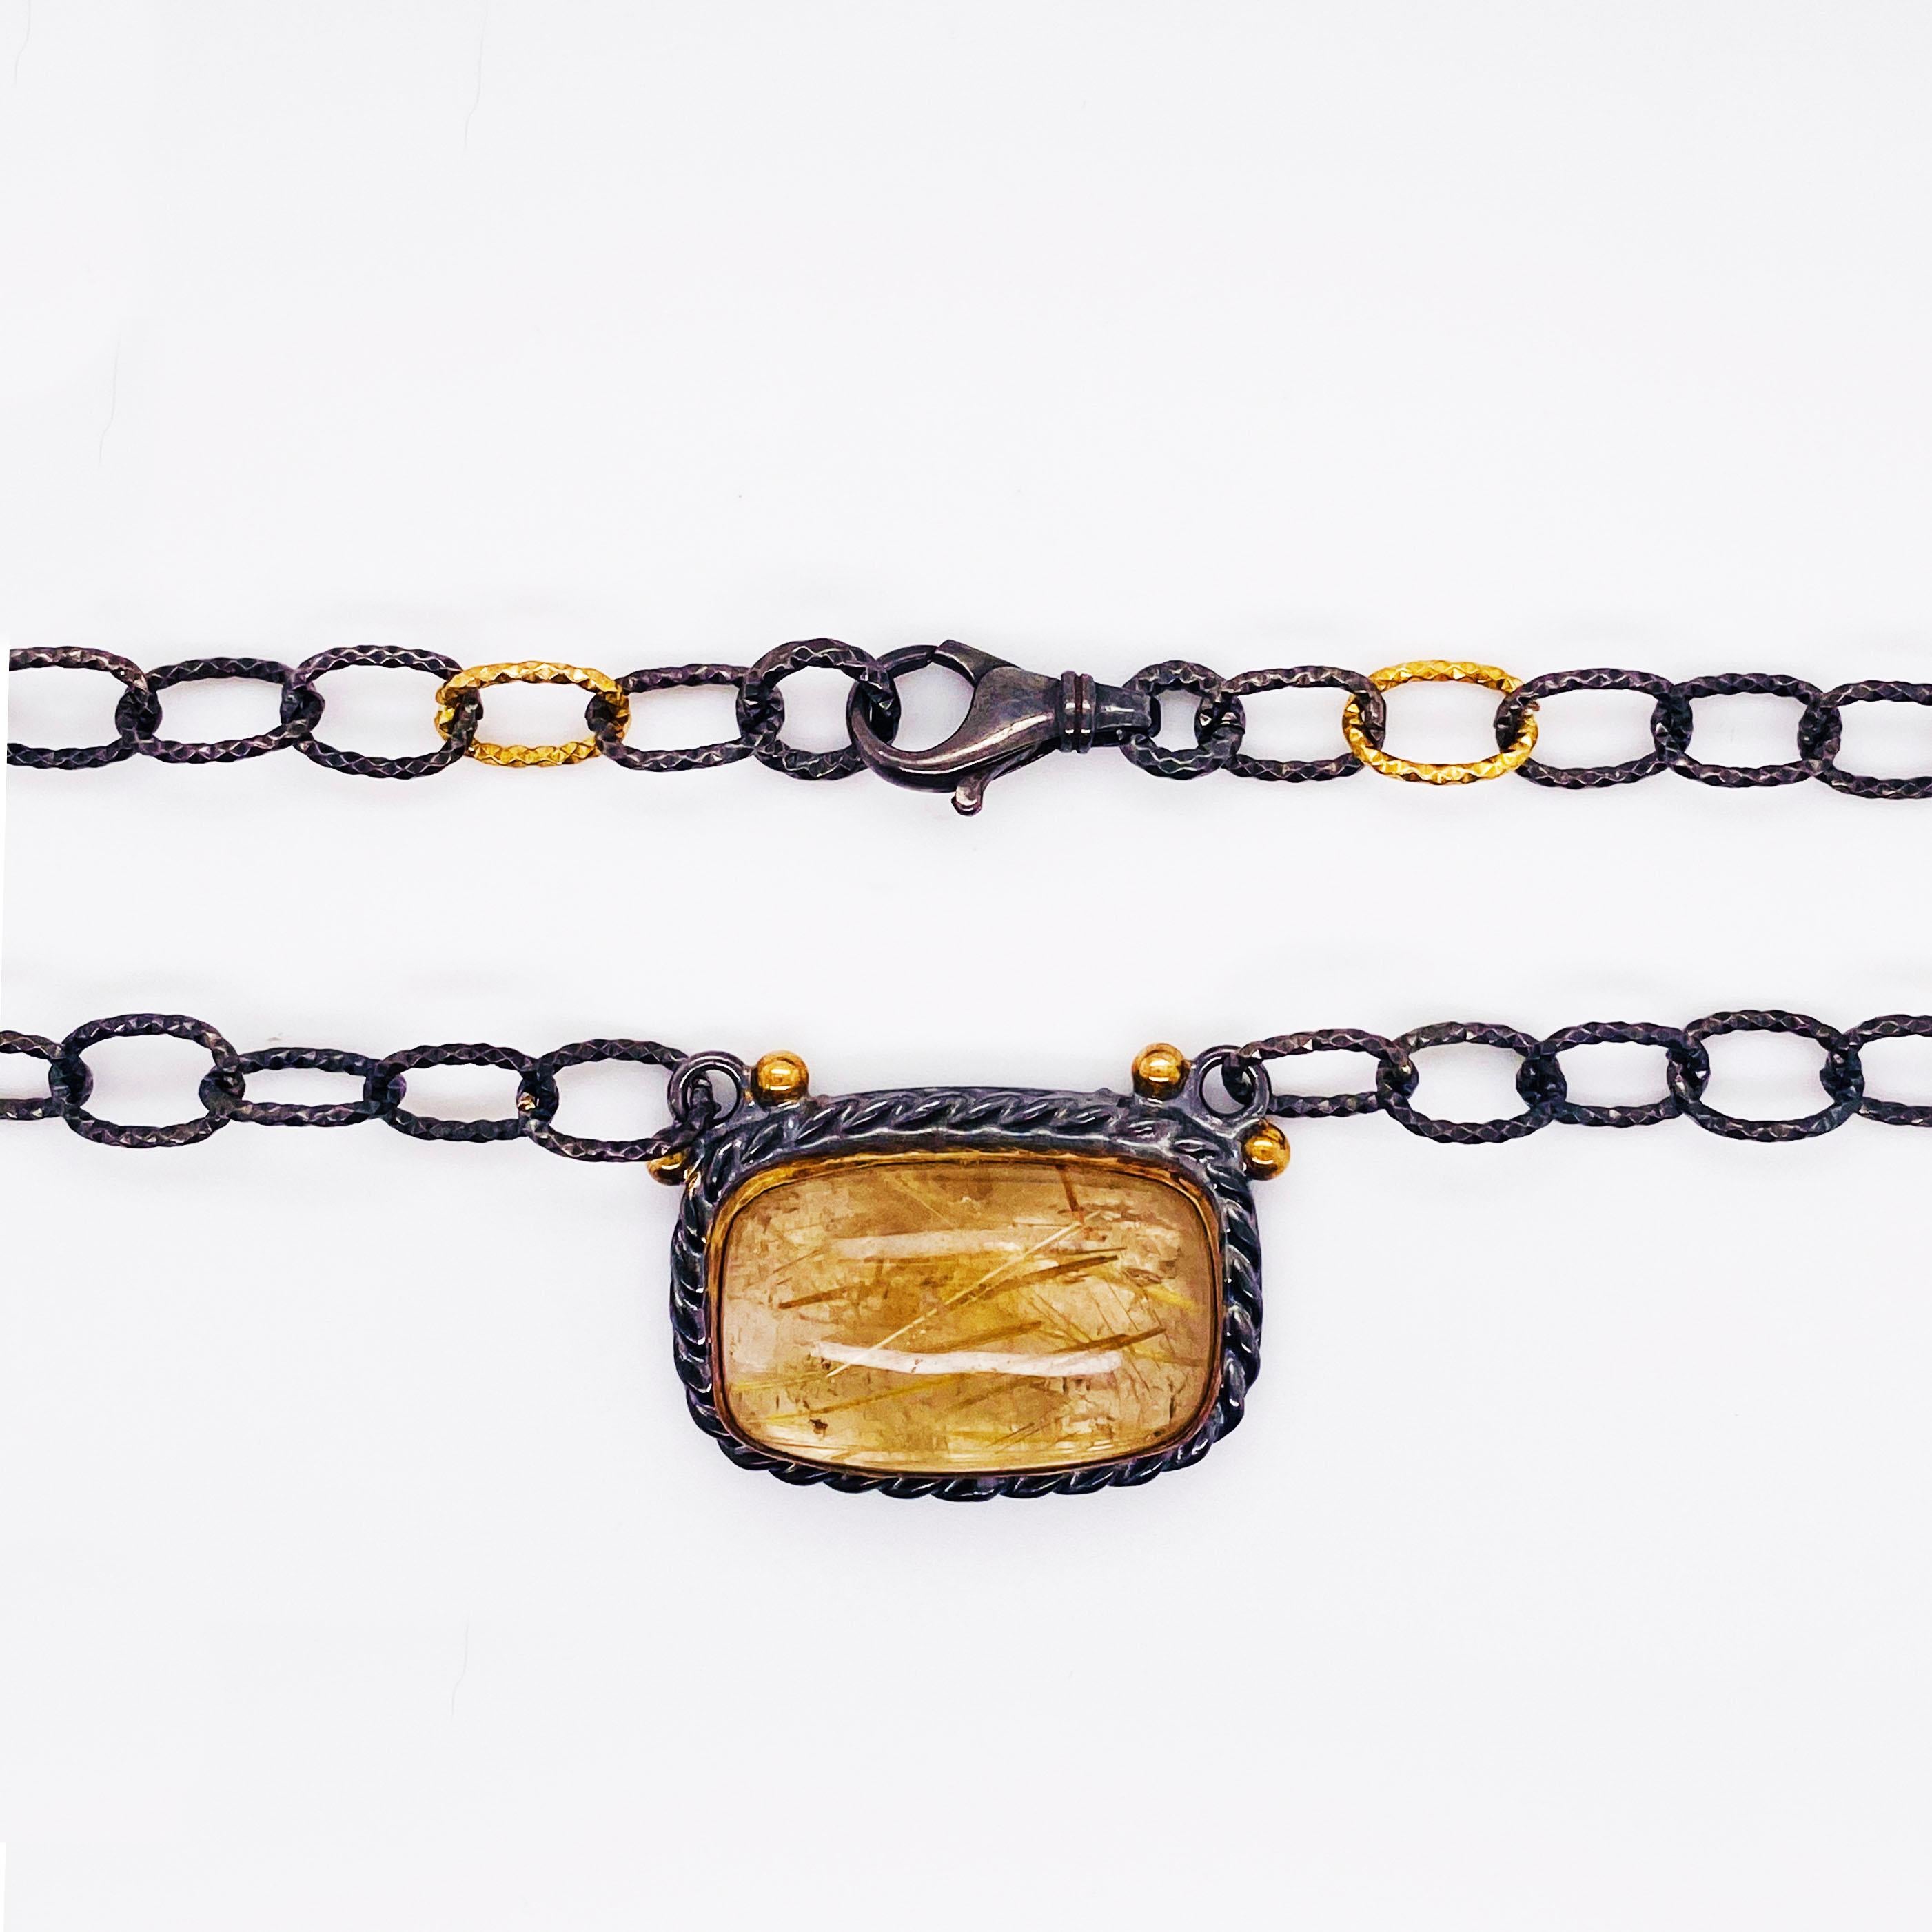 The rutilated quartz is the most amazing piece with gold rutile needles throughout!  No two rutilated quartz are the same and this one definitely stands out among the rest.  The gemstone was handpicked amongst 100's of other rutilated quartz and